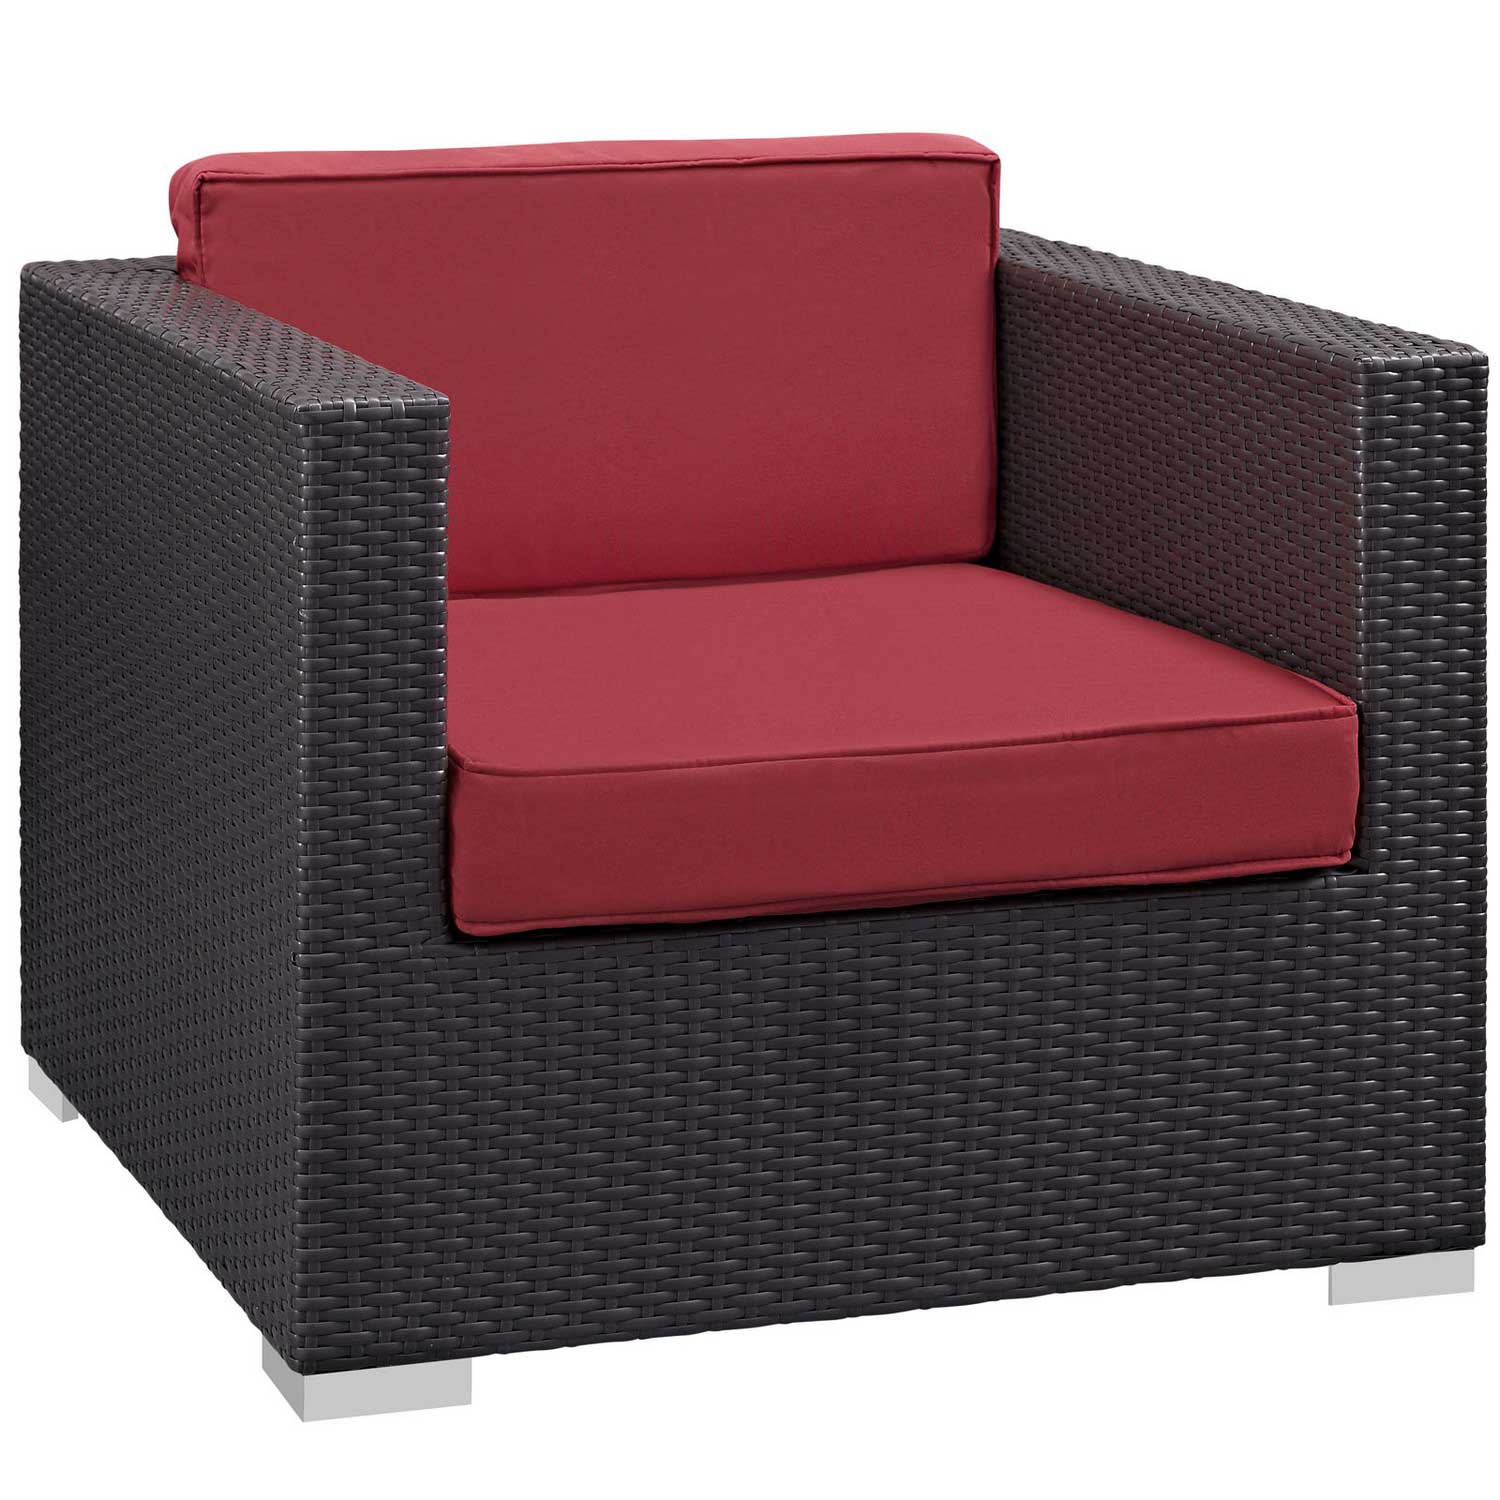 Modway Gather Outdoor Patio Armchair - Espresso/Red